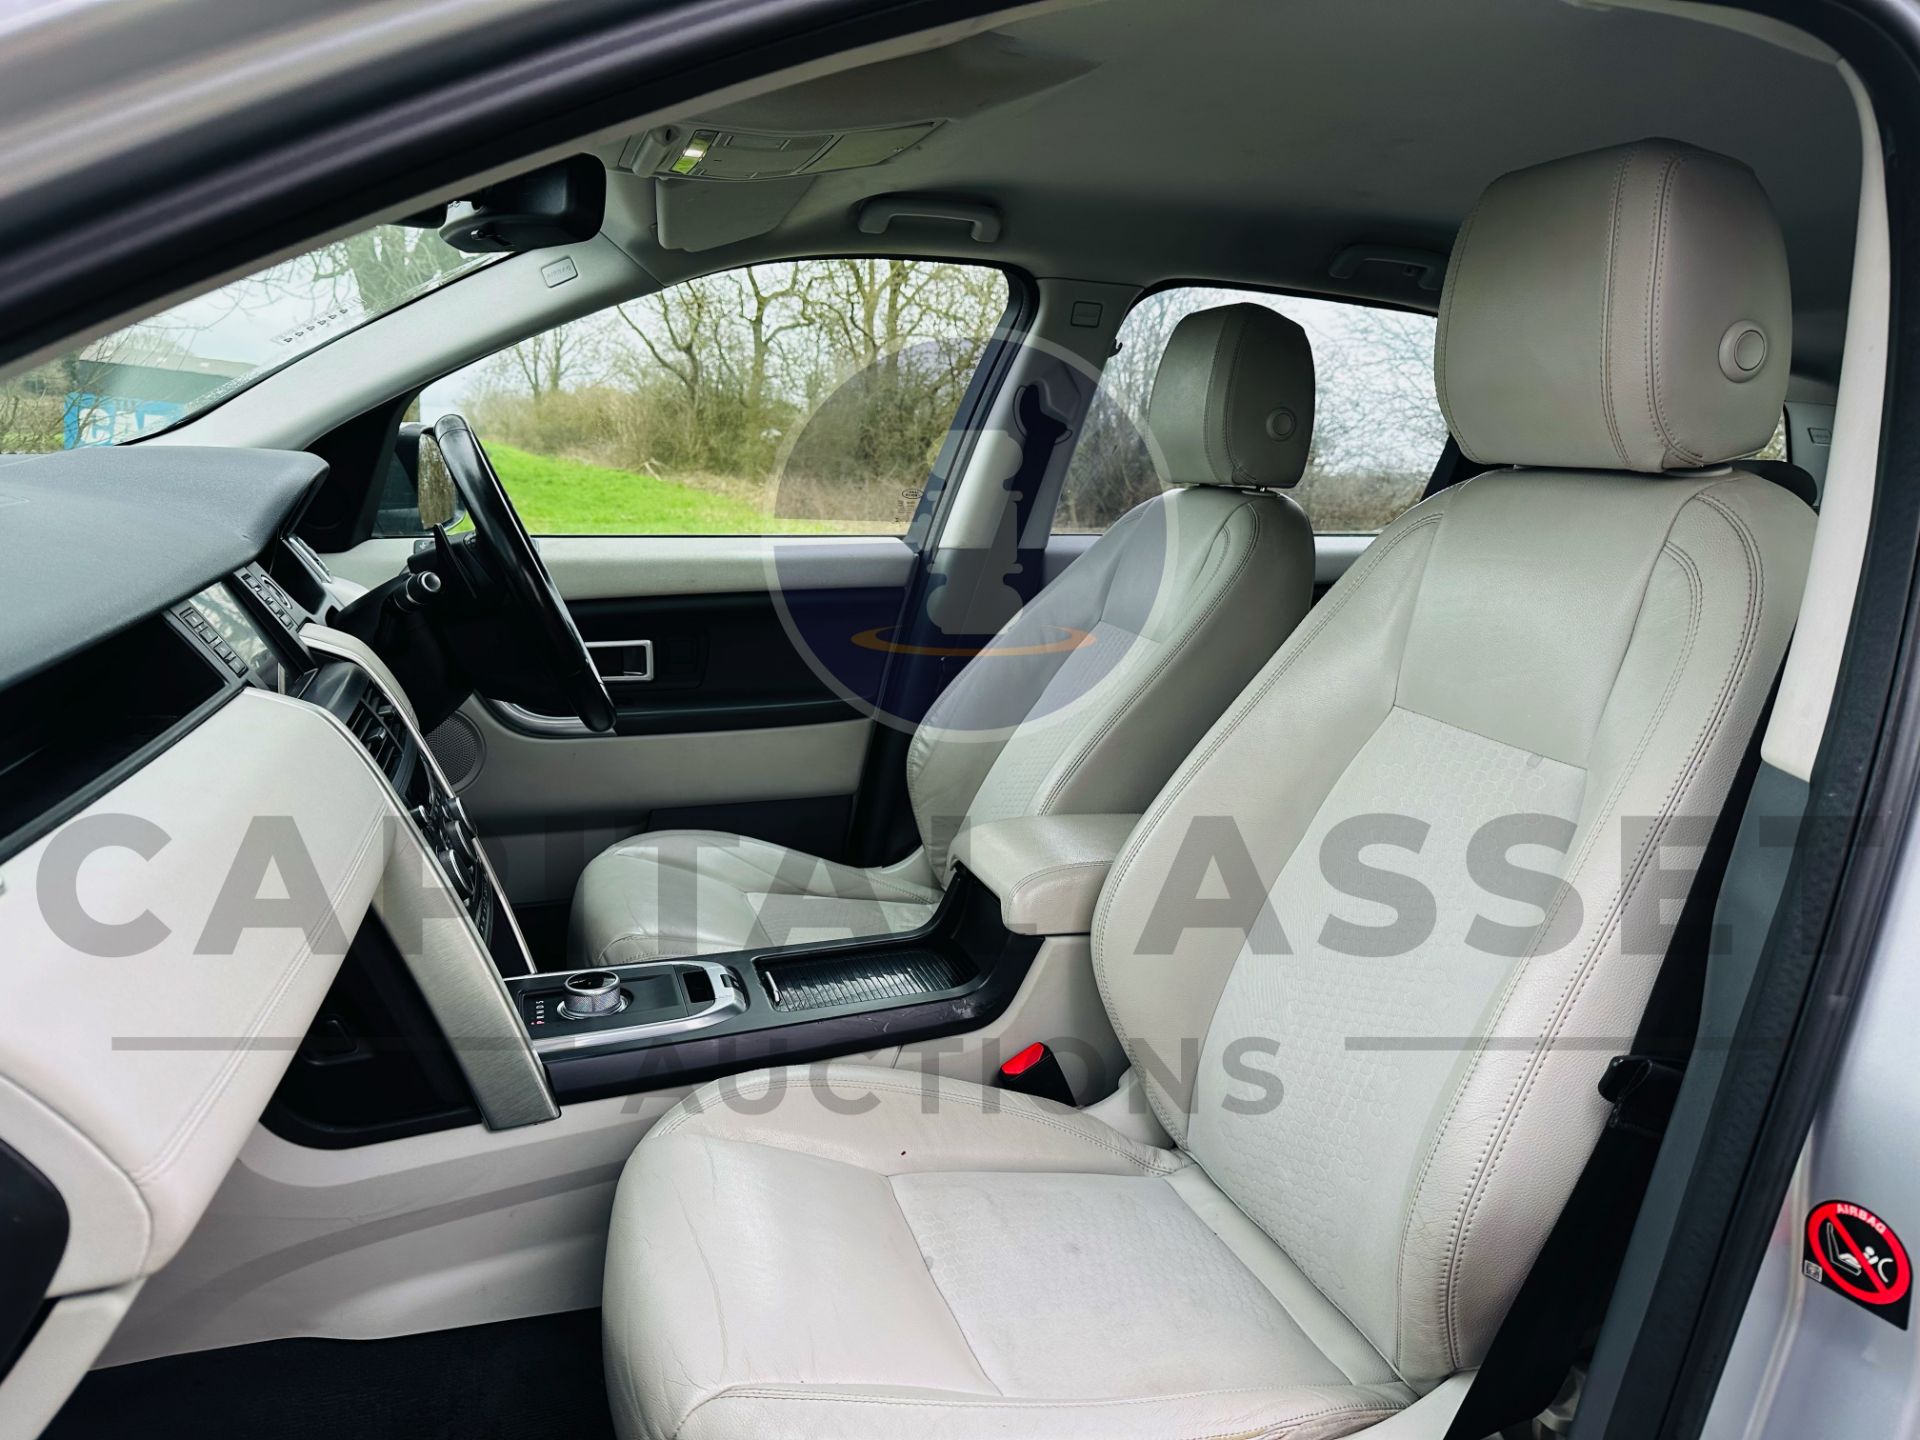 LAND ROVER DISCOVERY SPORT *SE TECH* 7 SEATER SUV (65 REG - EURO 6) 2.0 TD4 - AUTOMATIC - Image 22 of 38